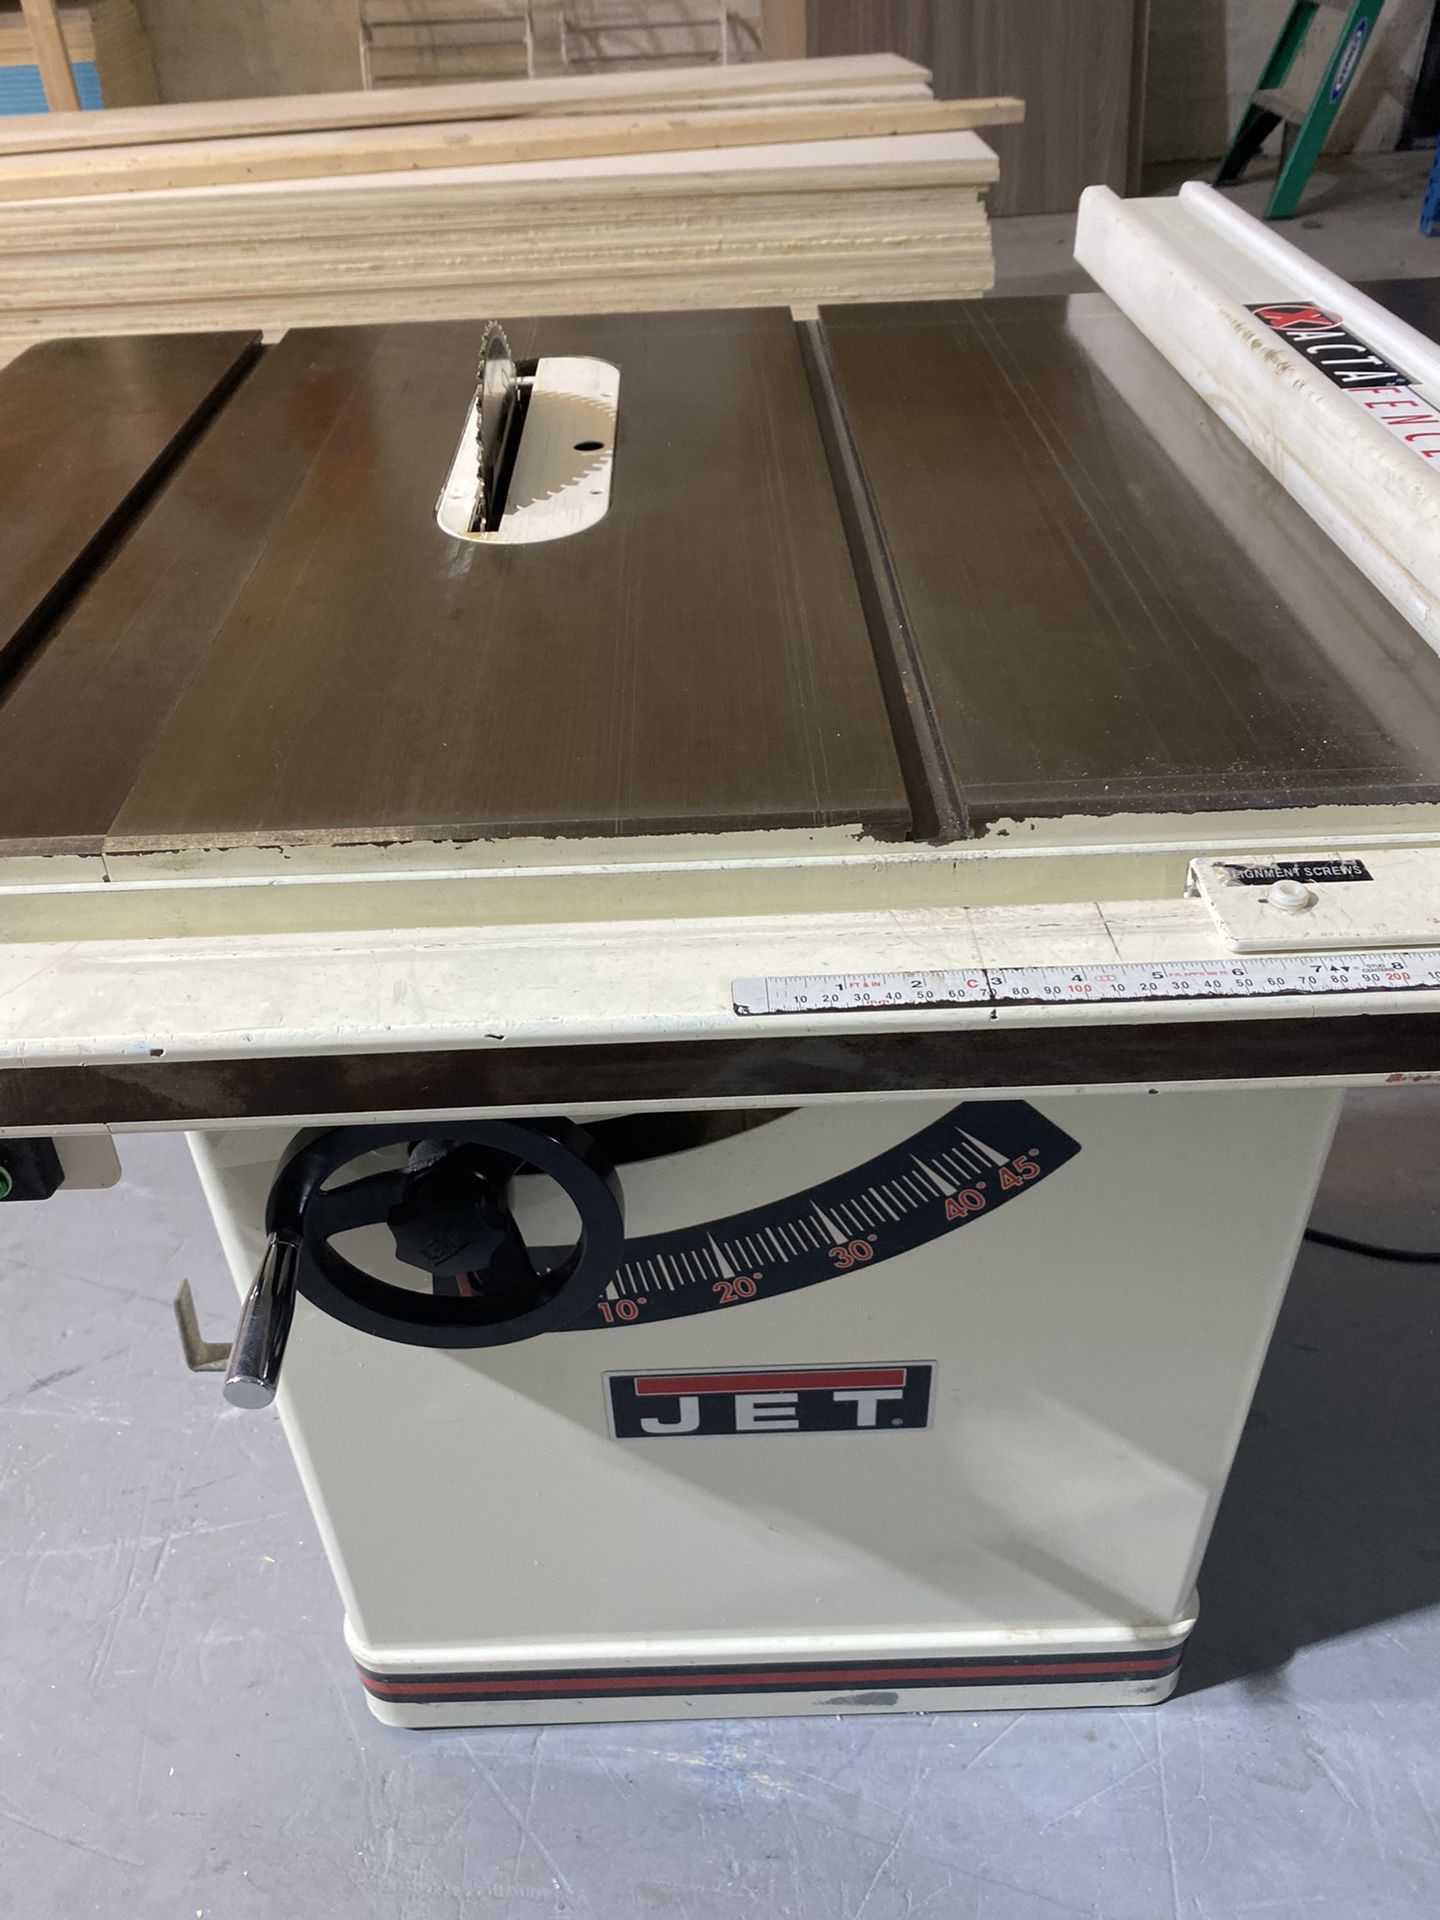 Table saw jet